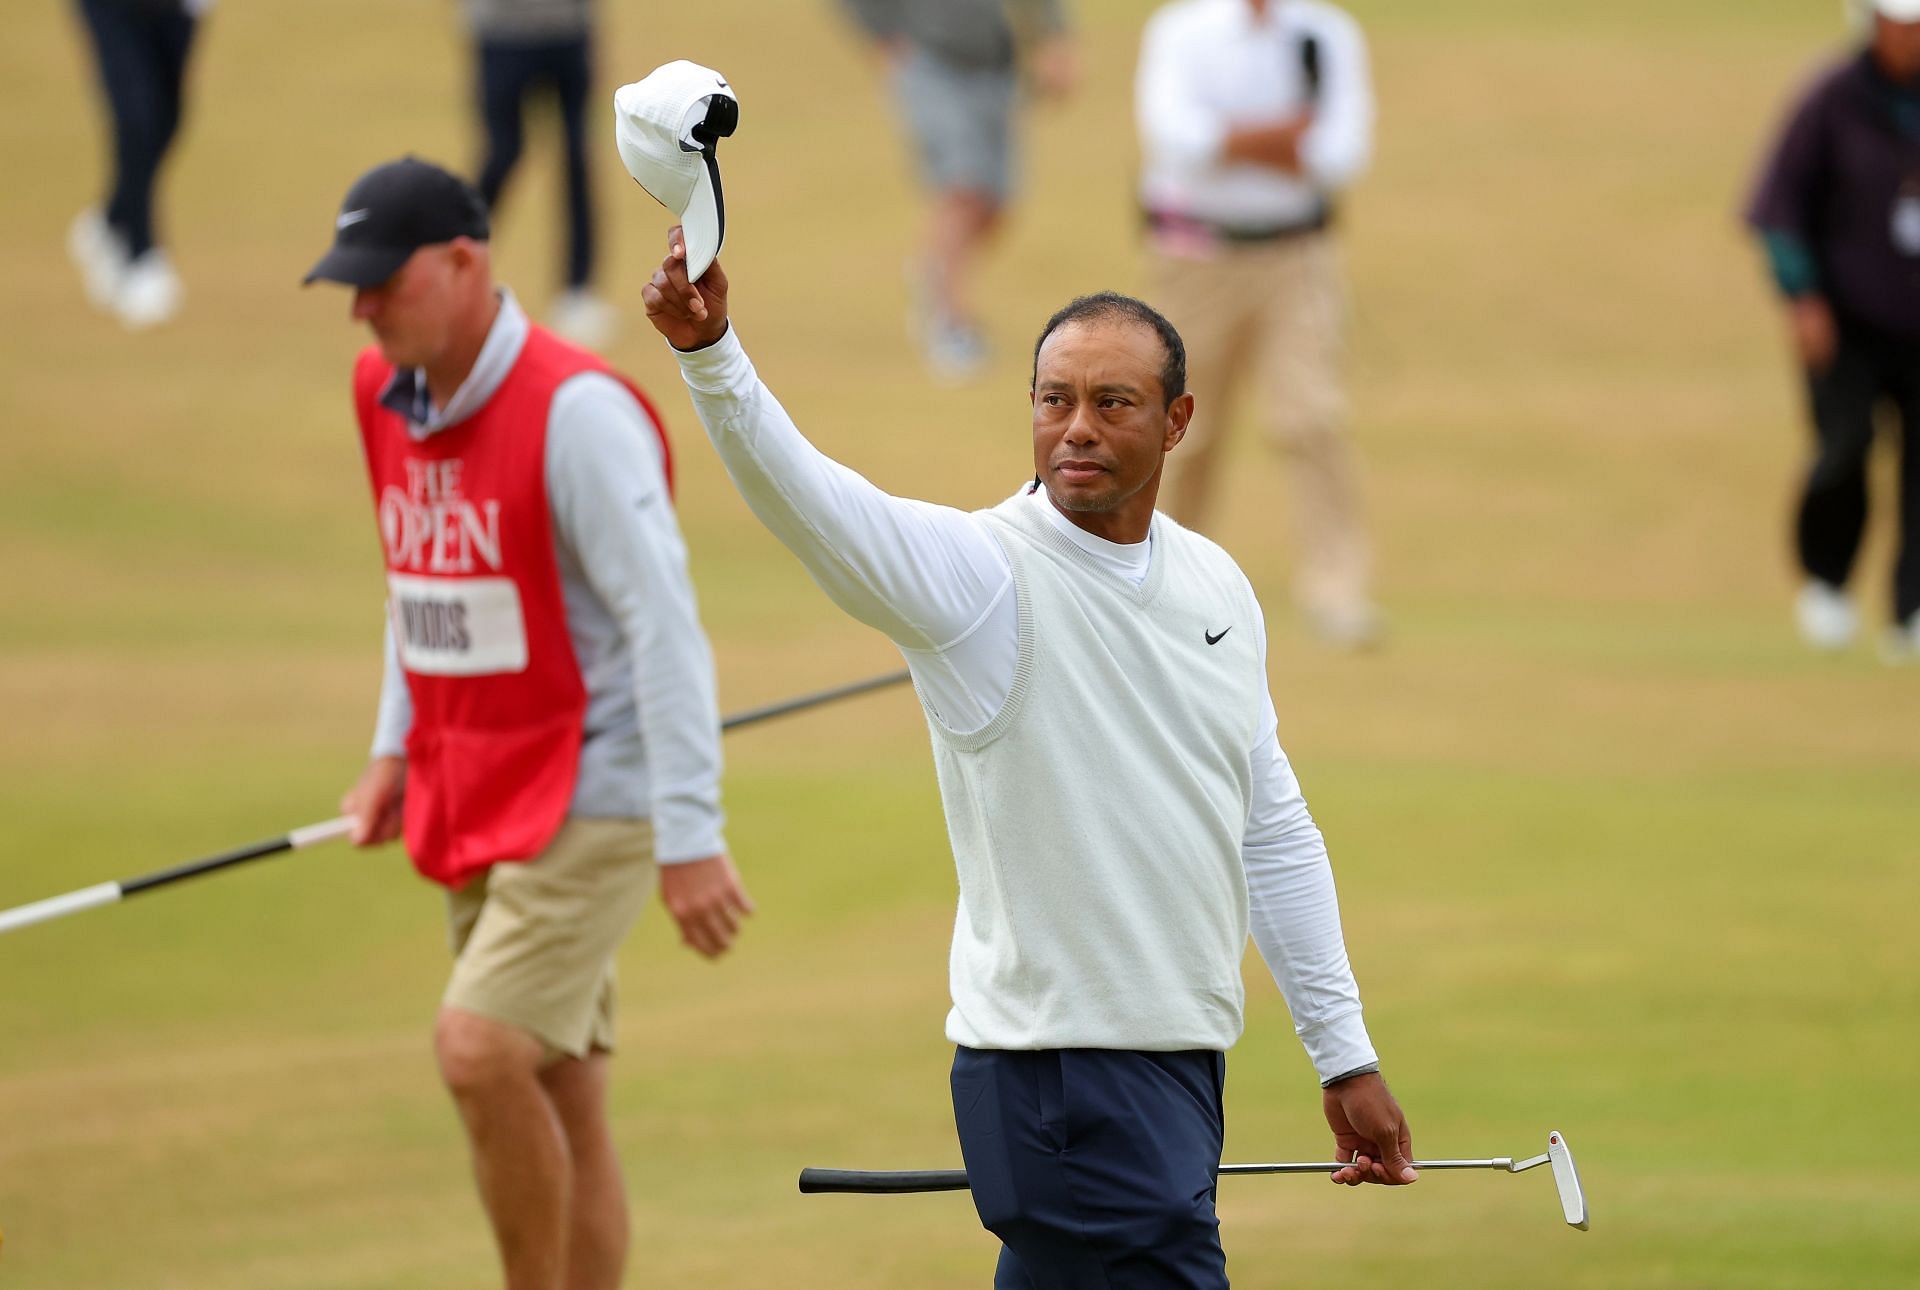 The 150th Open - Day Two Legendary golfer